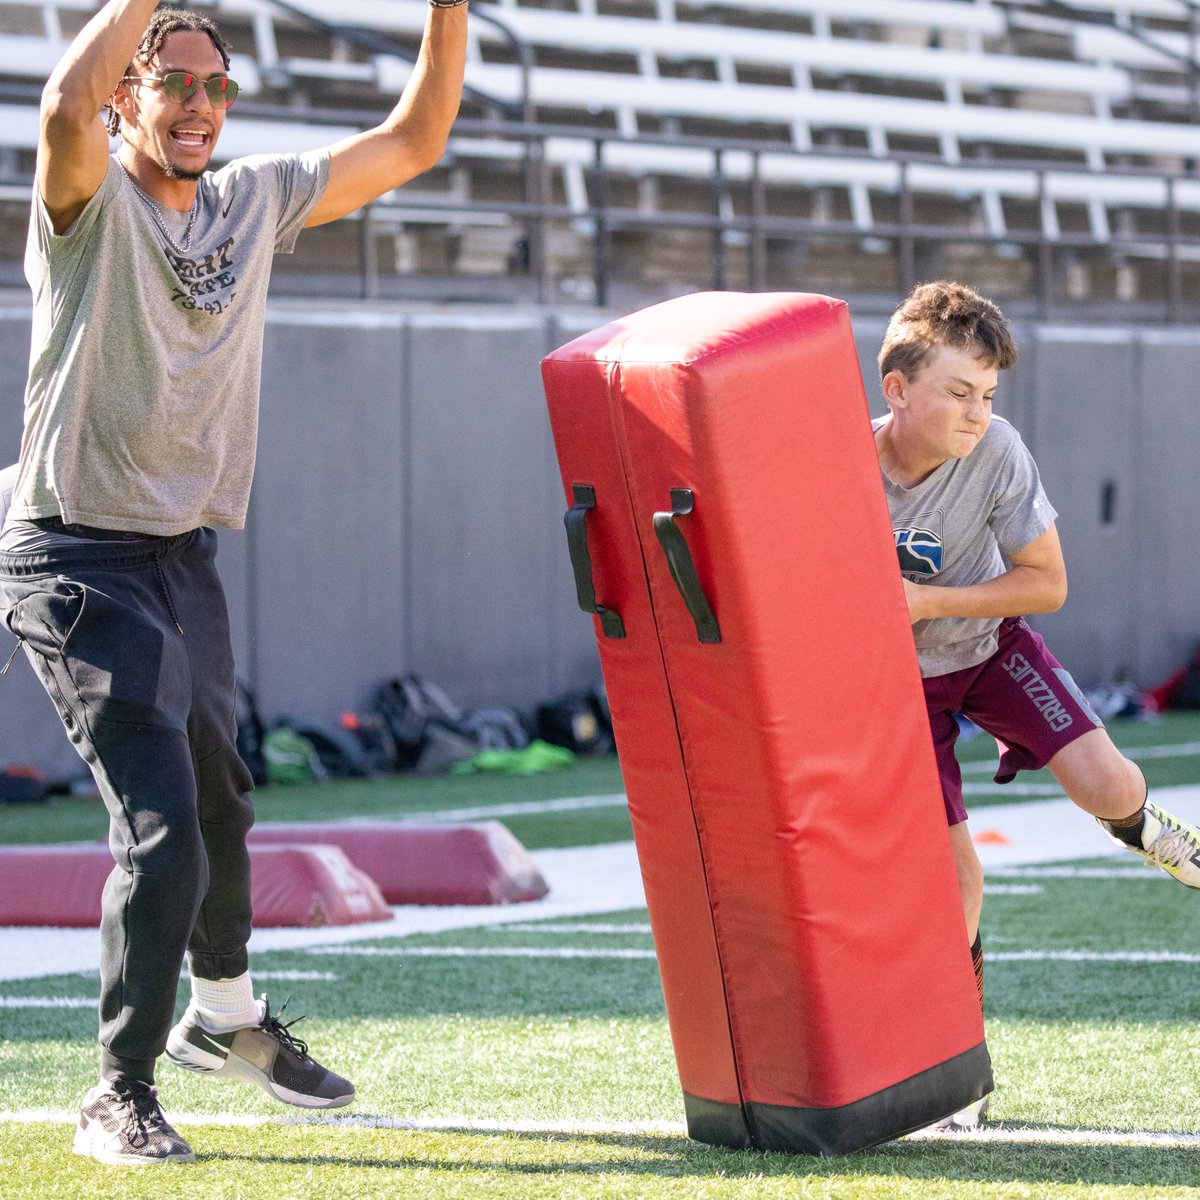 Nuthin' but fun at kids camp today! 👏

#GoGriz